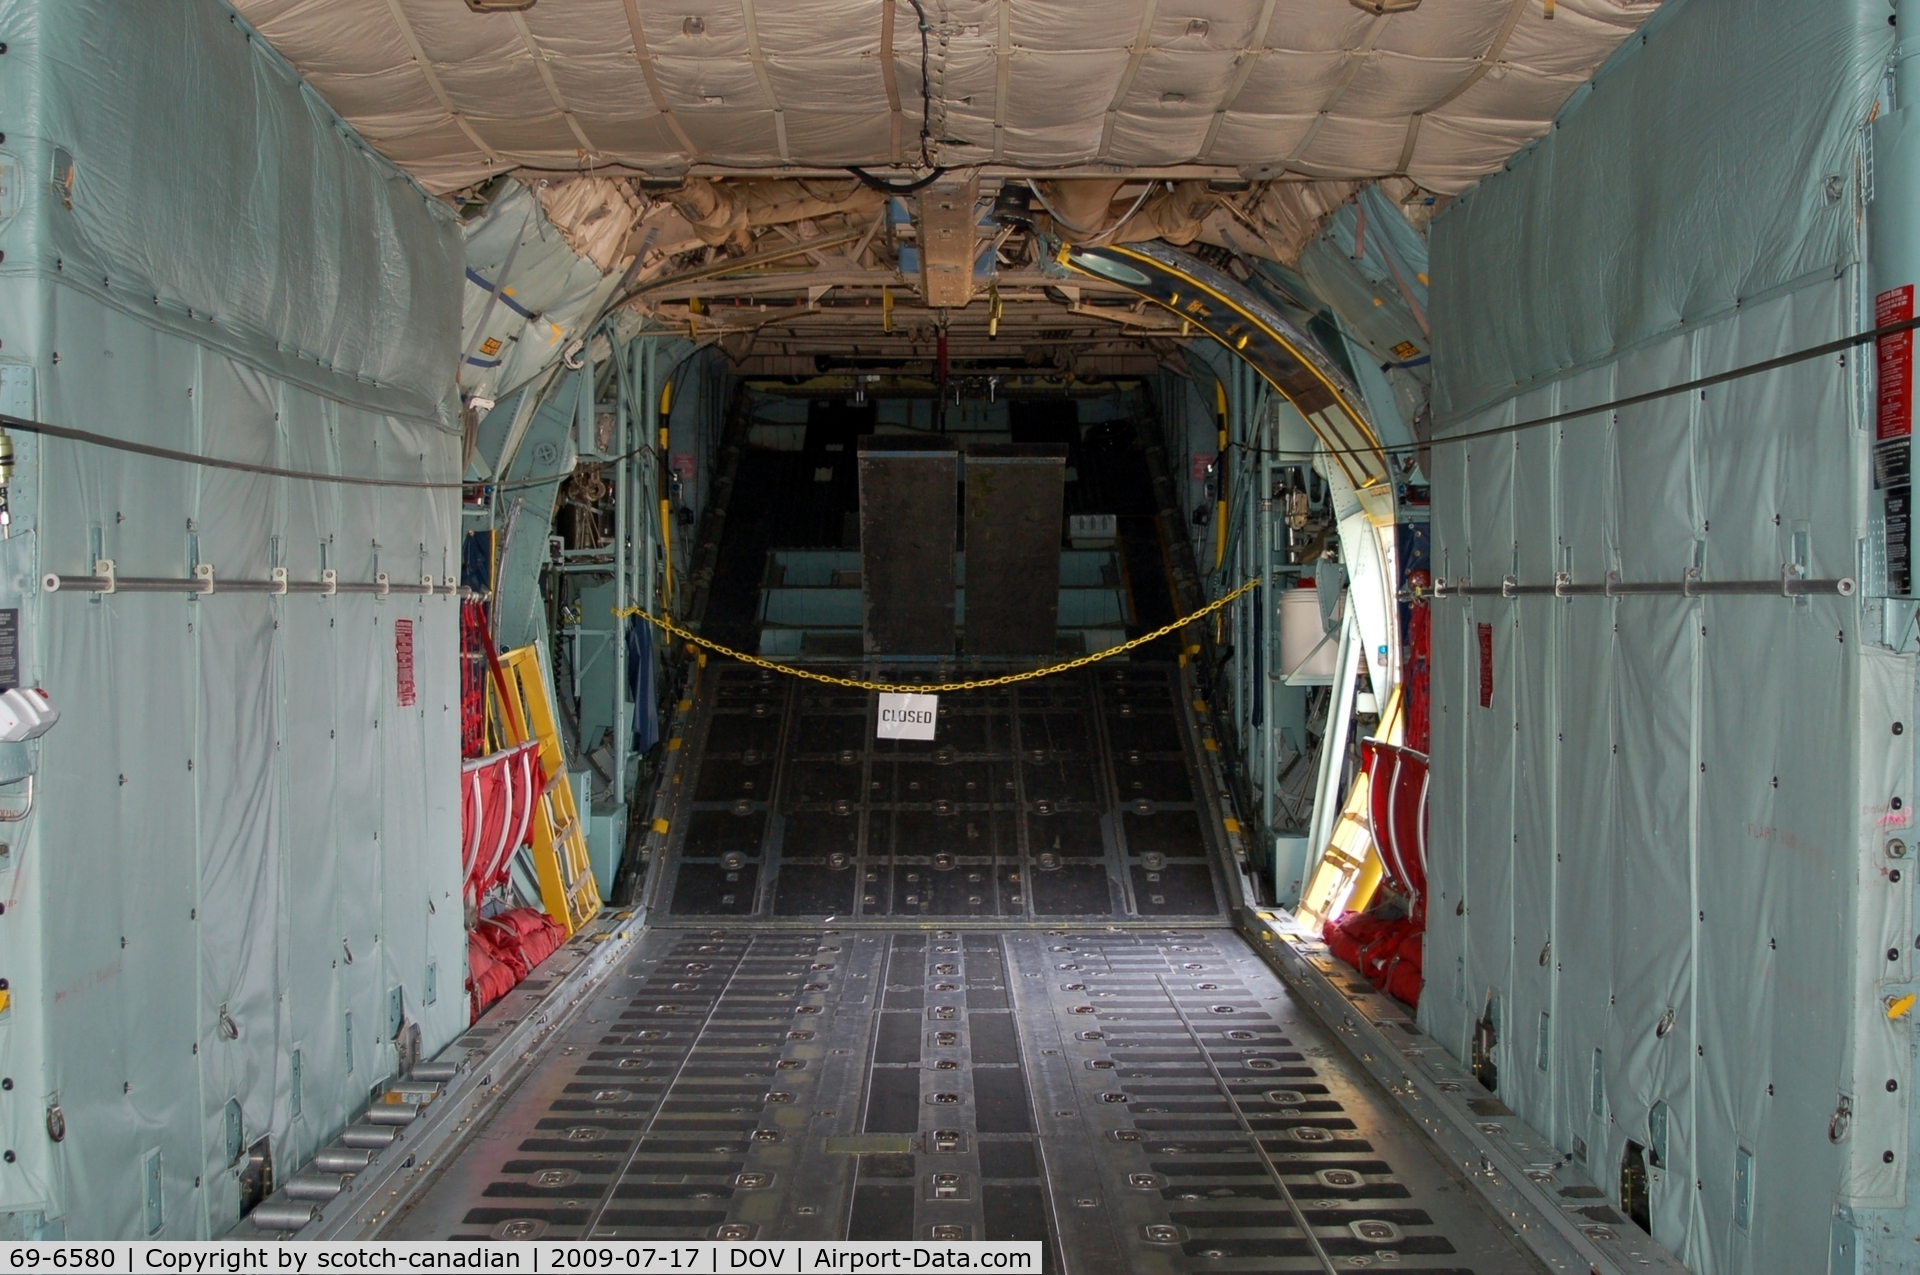 69-6580, 1969 Lockheed C-130E Hercules C/N 382-4356, Lockheed C-130E Hercules Cargo Bay, looking aft, at the Air Mobility Command Museum, Dover AFB, DE